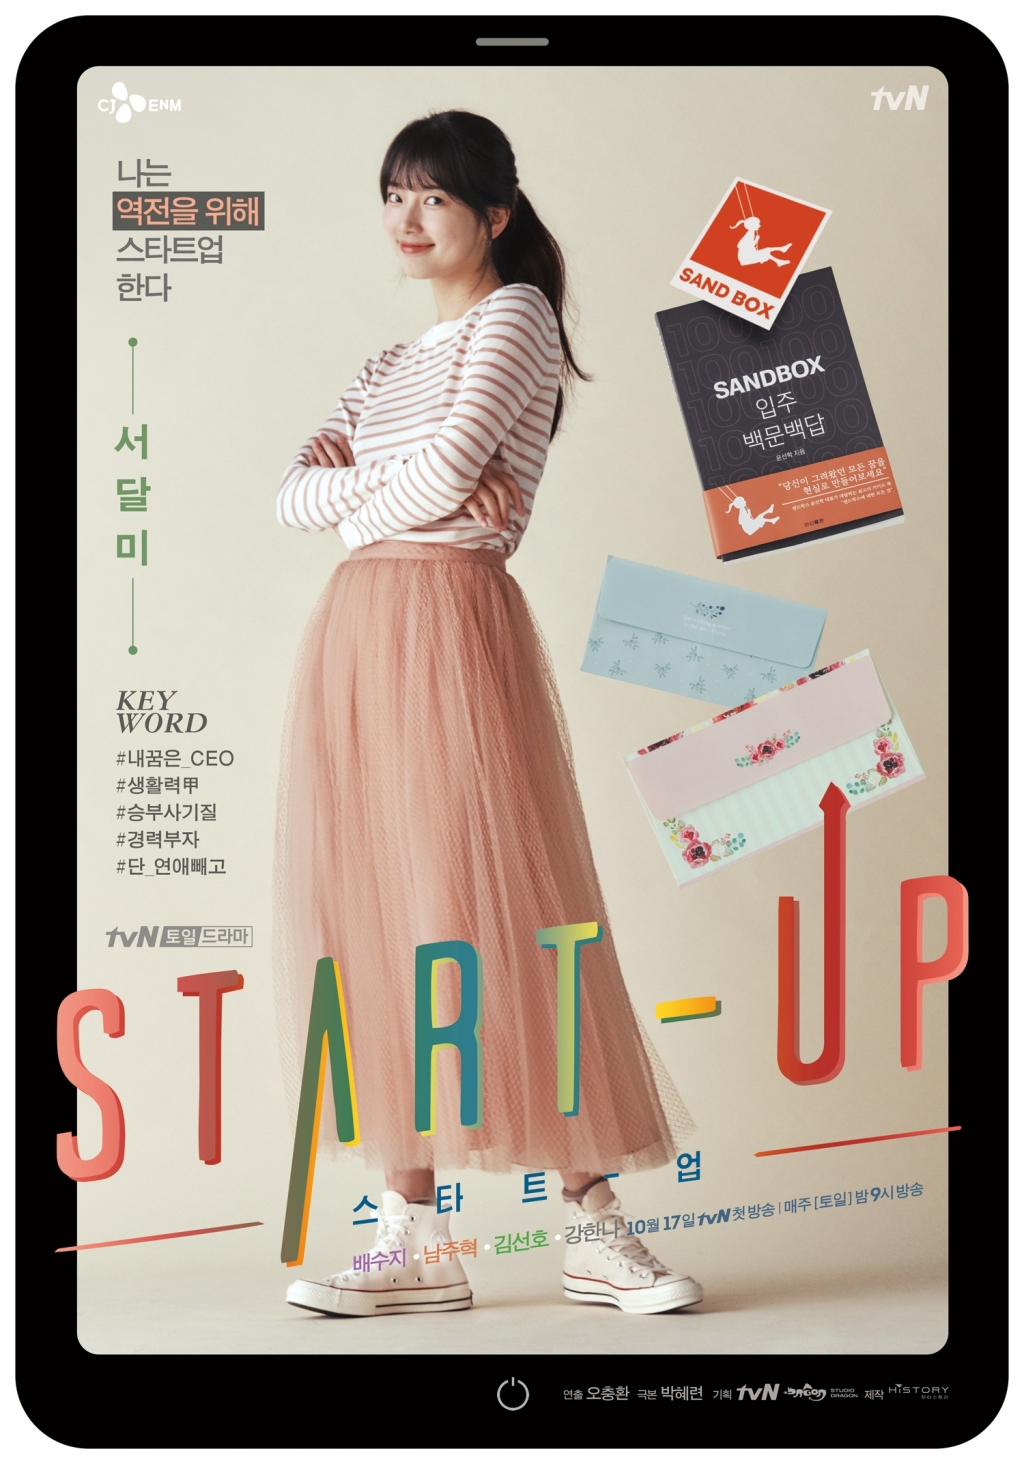 suzy-to-participate-in-ost-of-her-upcoming-tvn-drama-startup-3